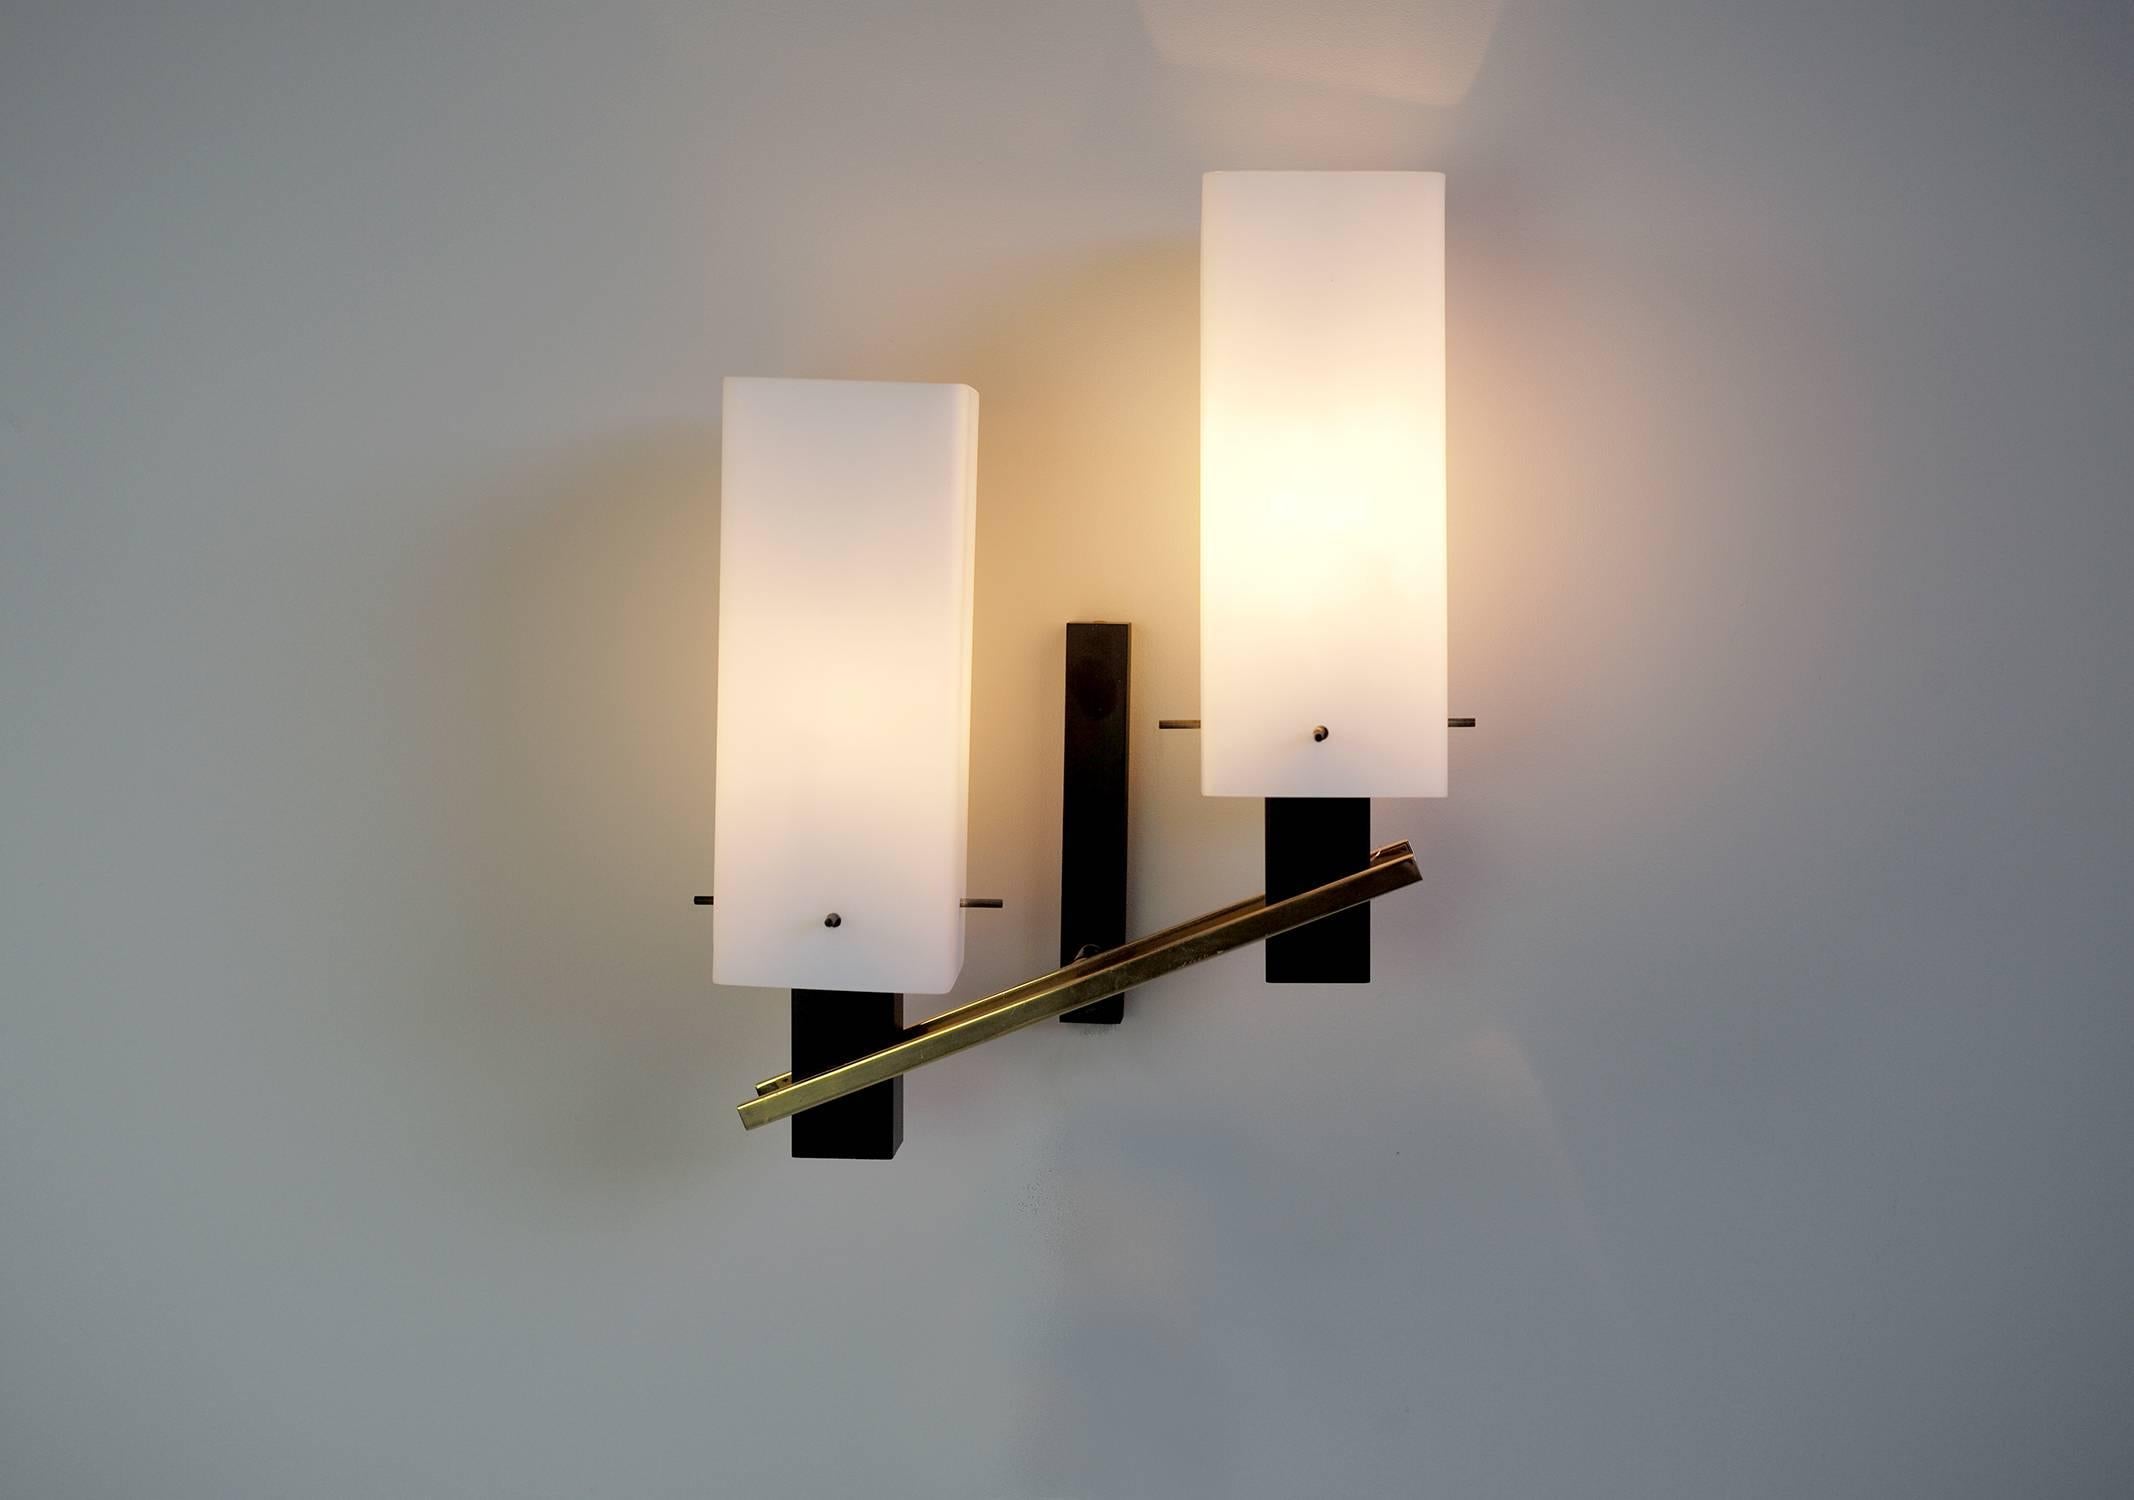 Large pair of two-light sconces in matte black metal, brass and opaline, Maison Arlus, France, 1960. Very good quality of manufacture at the service of a sober and elegant design. Perfect original condition.